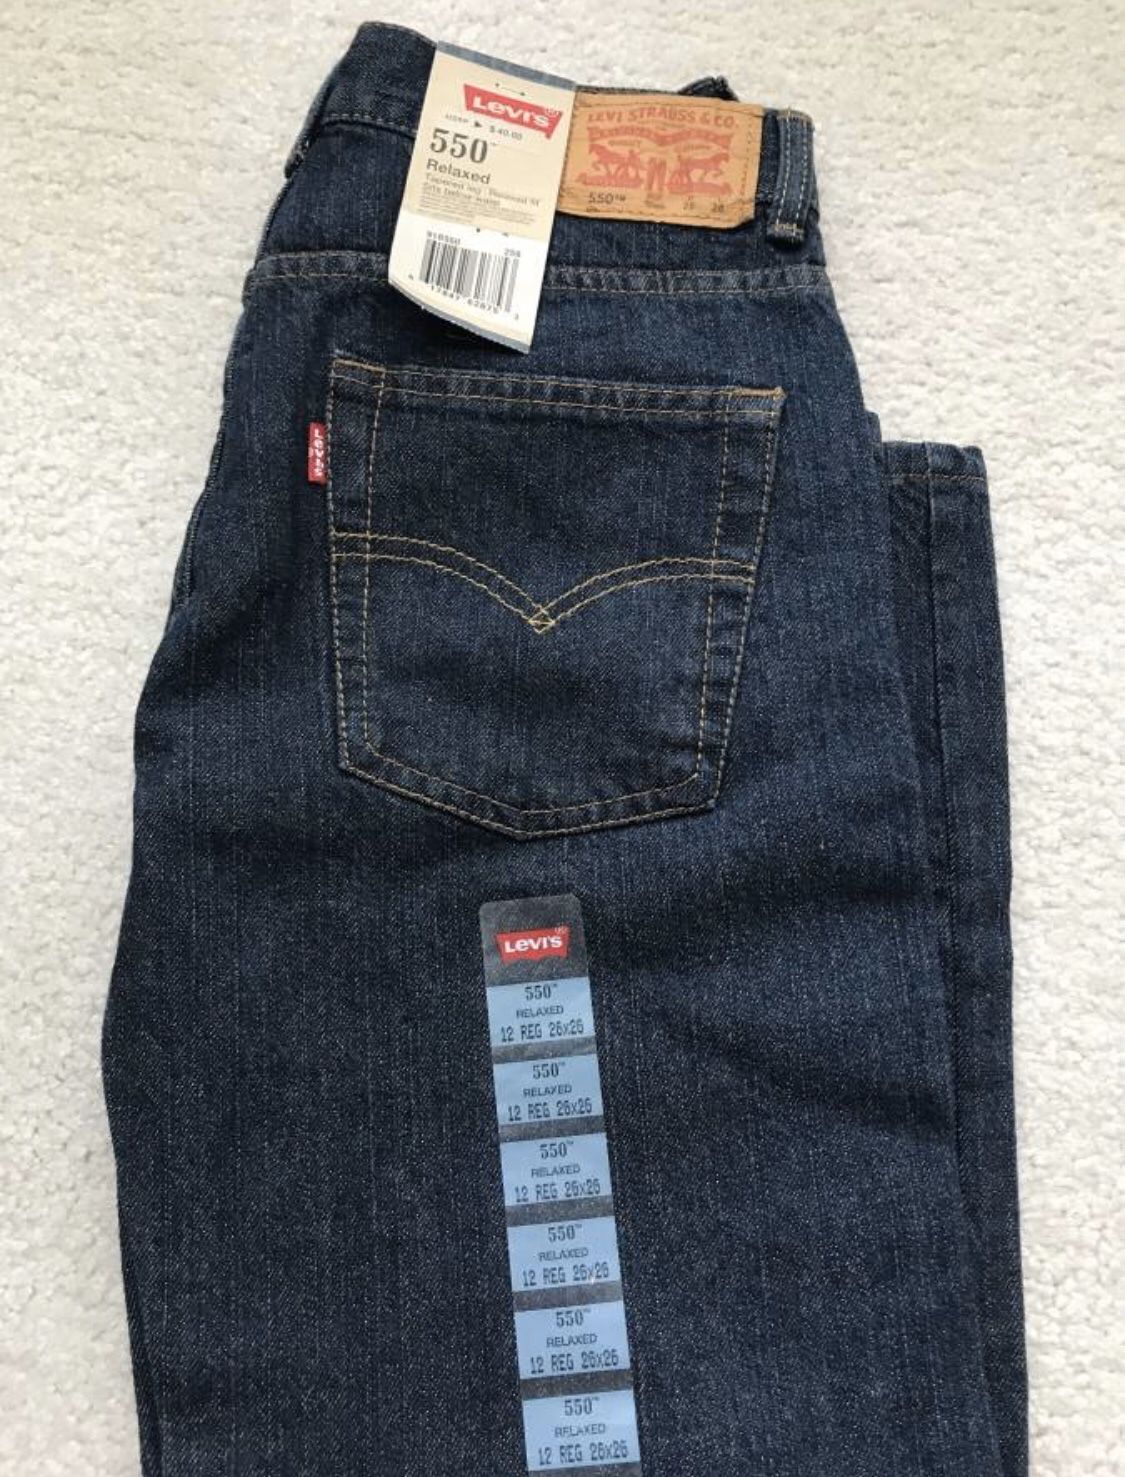 NEW with tags LEVI's 550 Relaxed Jeans Boys Youth 12 regular 26 x 26 Darker wash Orig Retail $40